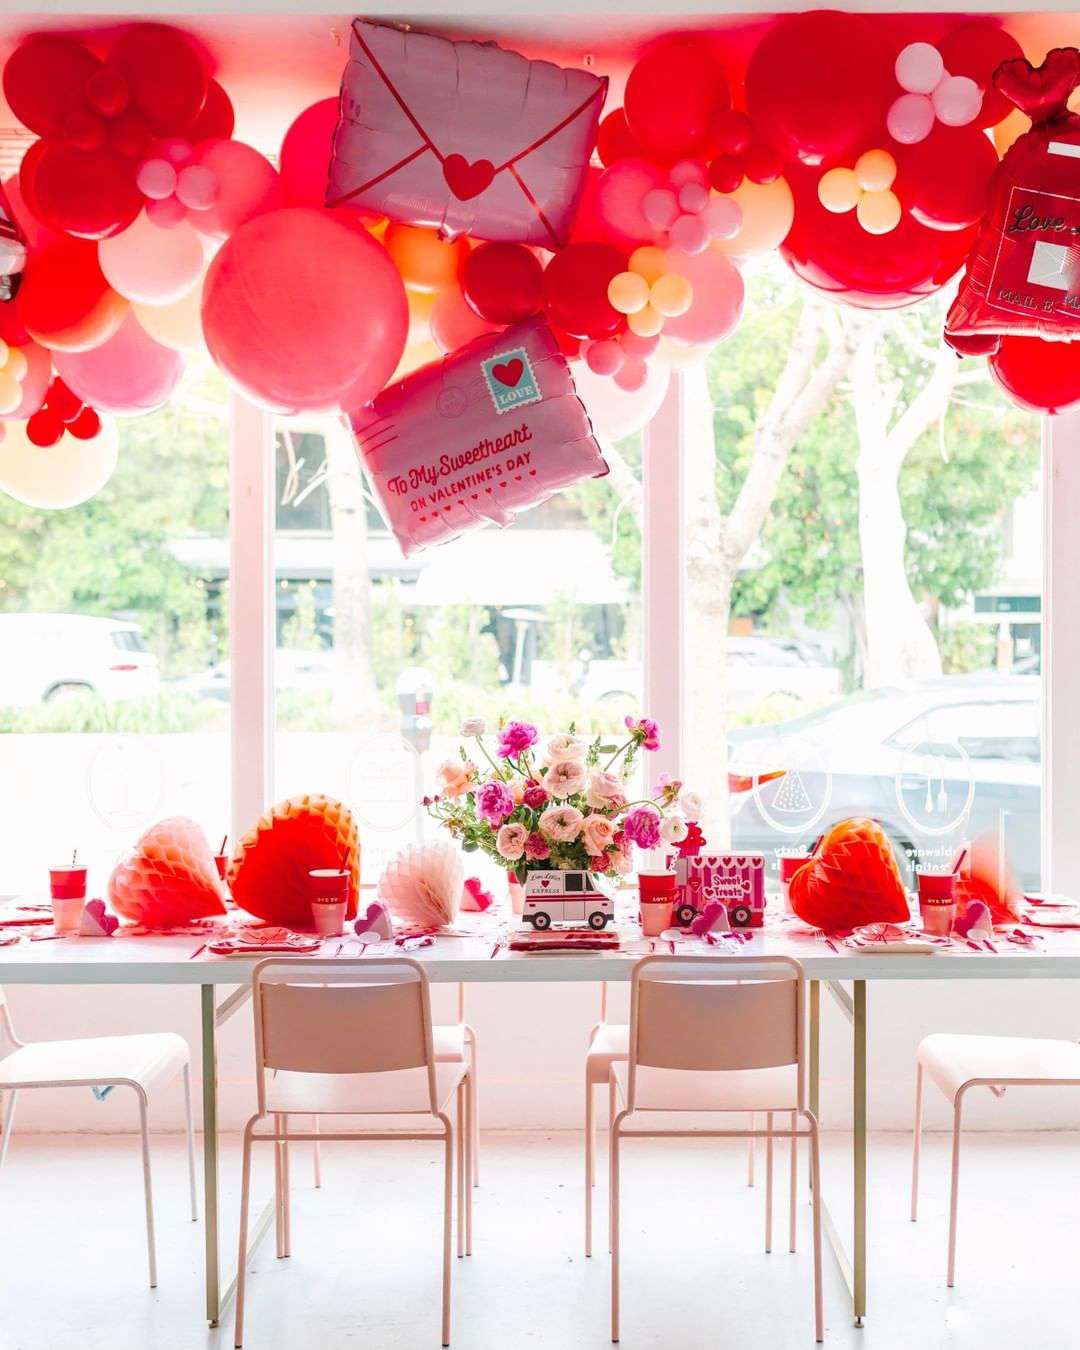 Pink and red balloons above Valentine's Day table